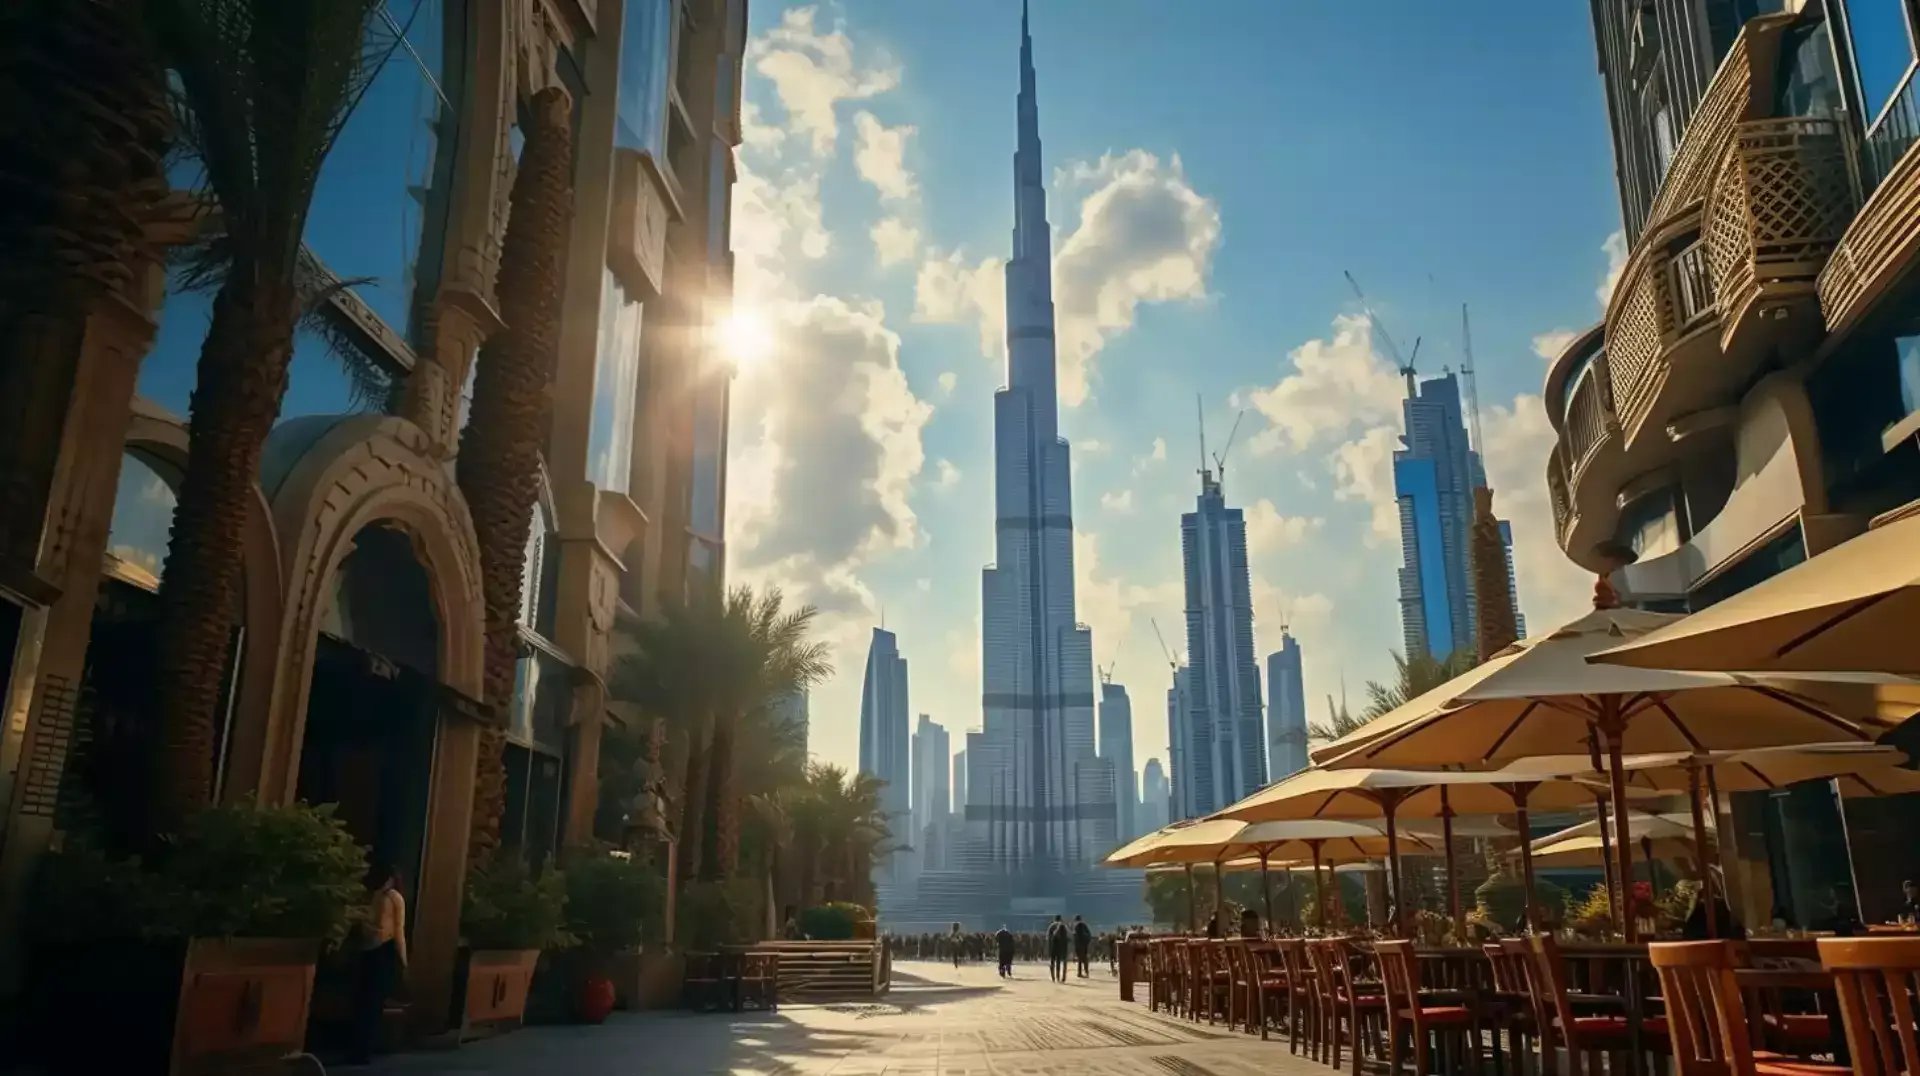 Embarking on the journey of entrepreneurship in Dubai with skyscrapers in the background